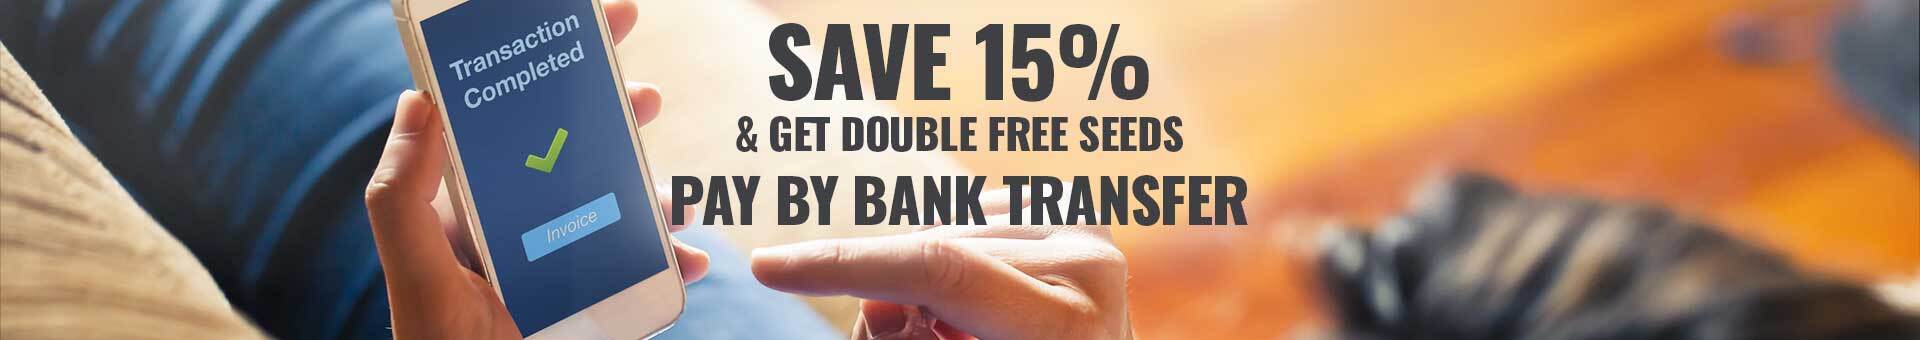 MSNL15% off bank transfer and double free seeds